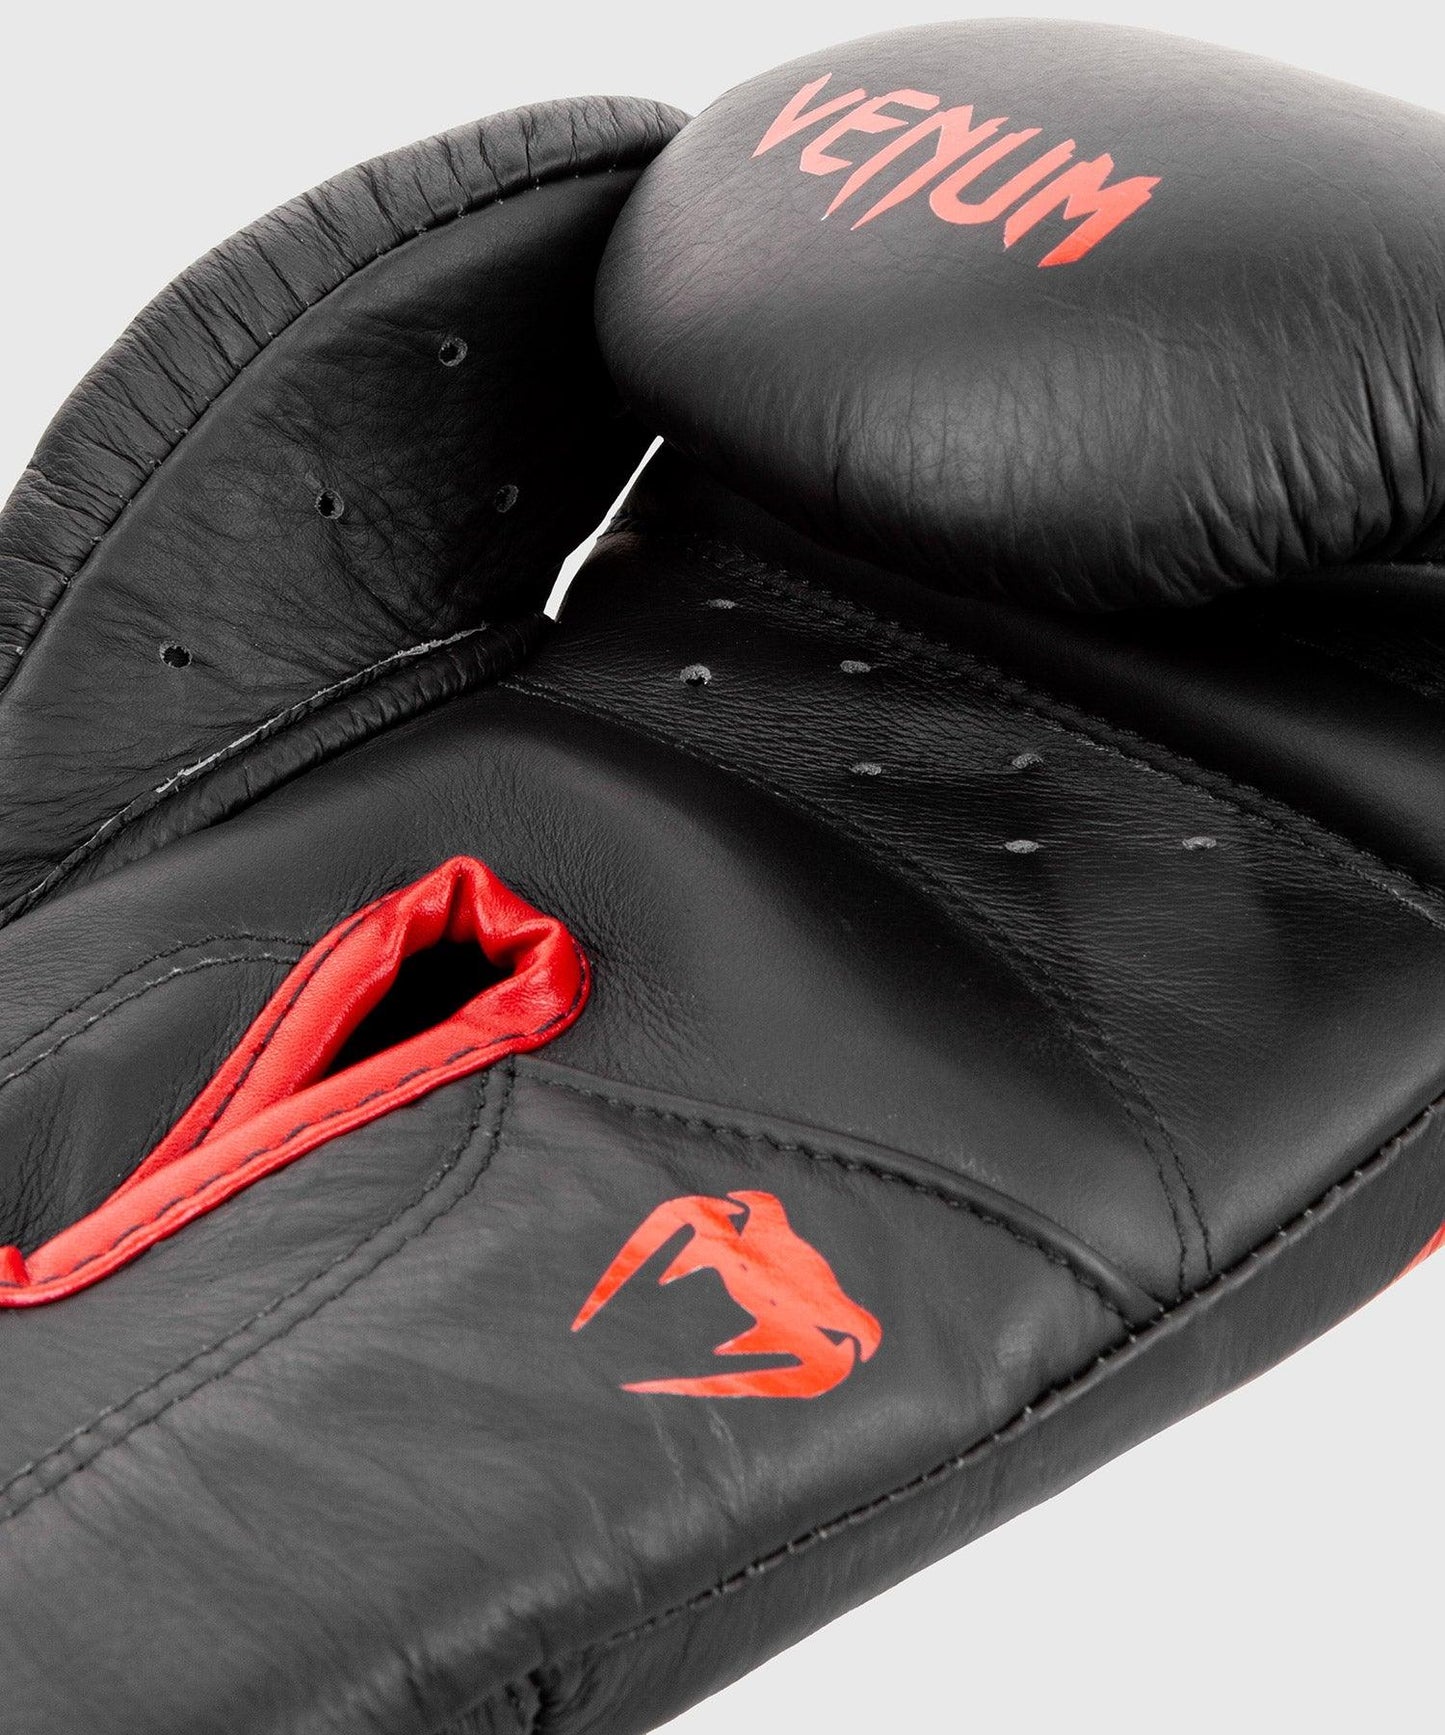 Venum Giant 2.0 Pro Boxing Gloves Velcro - Black/Red Picture 5